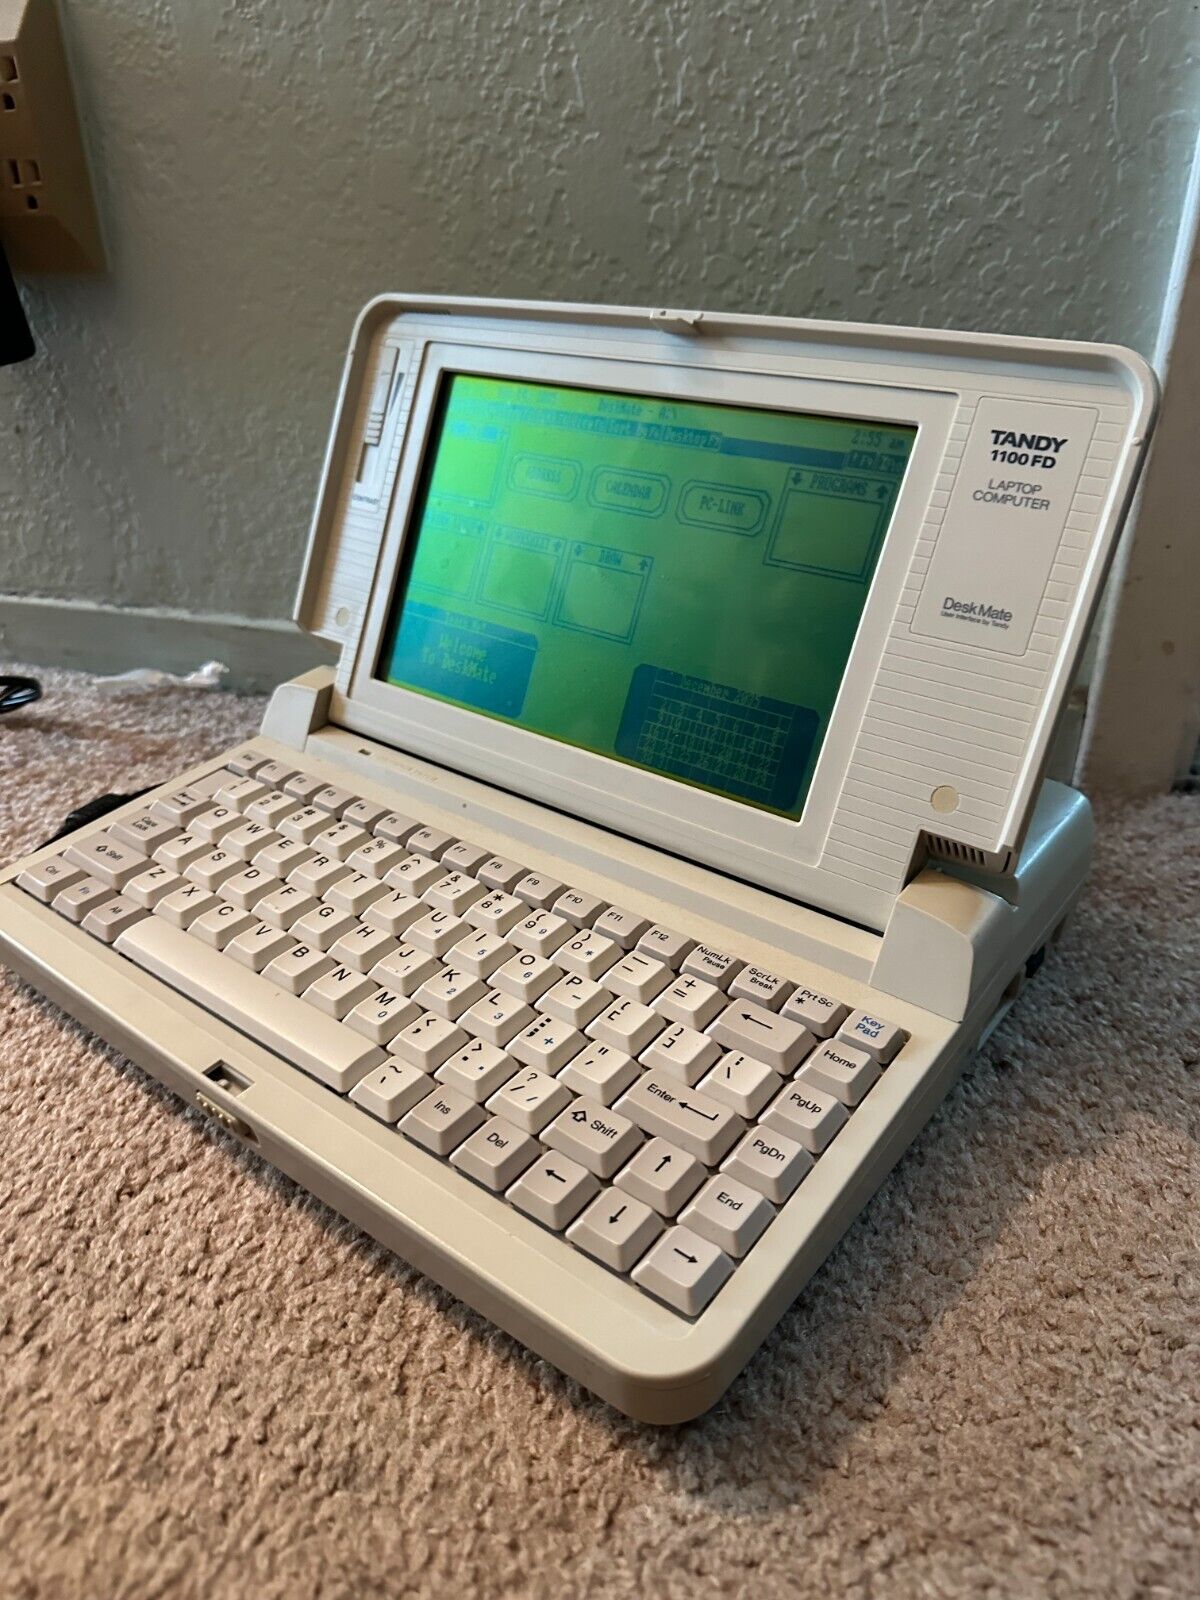 TANDY 1100FD LAPTOP Vintage 1989 w/  original power cord. WORKING CONDITION